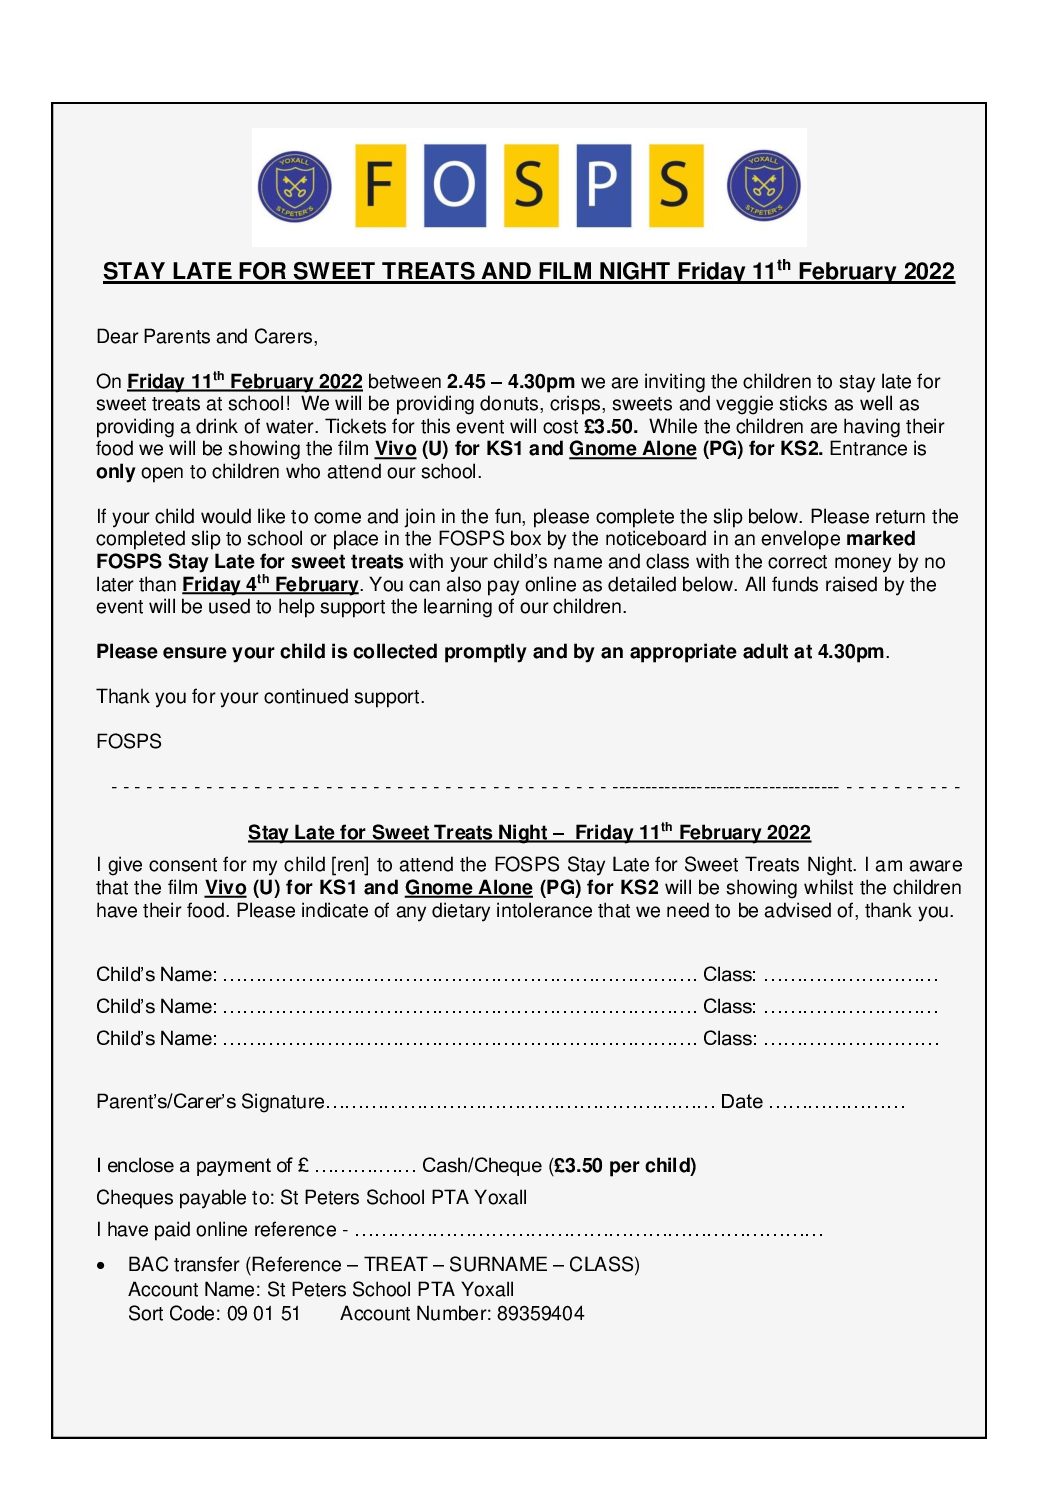 Booking Form for the Sweets and Treats Movie Night – Friday 11th February 2022